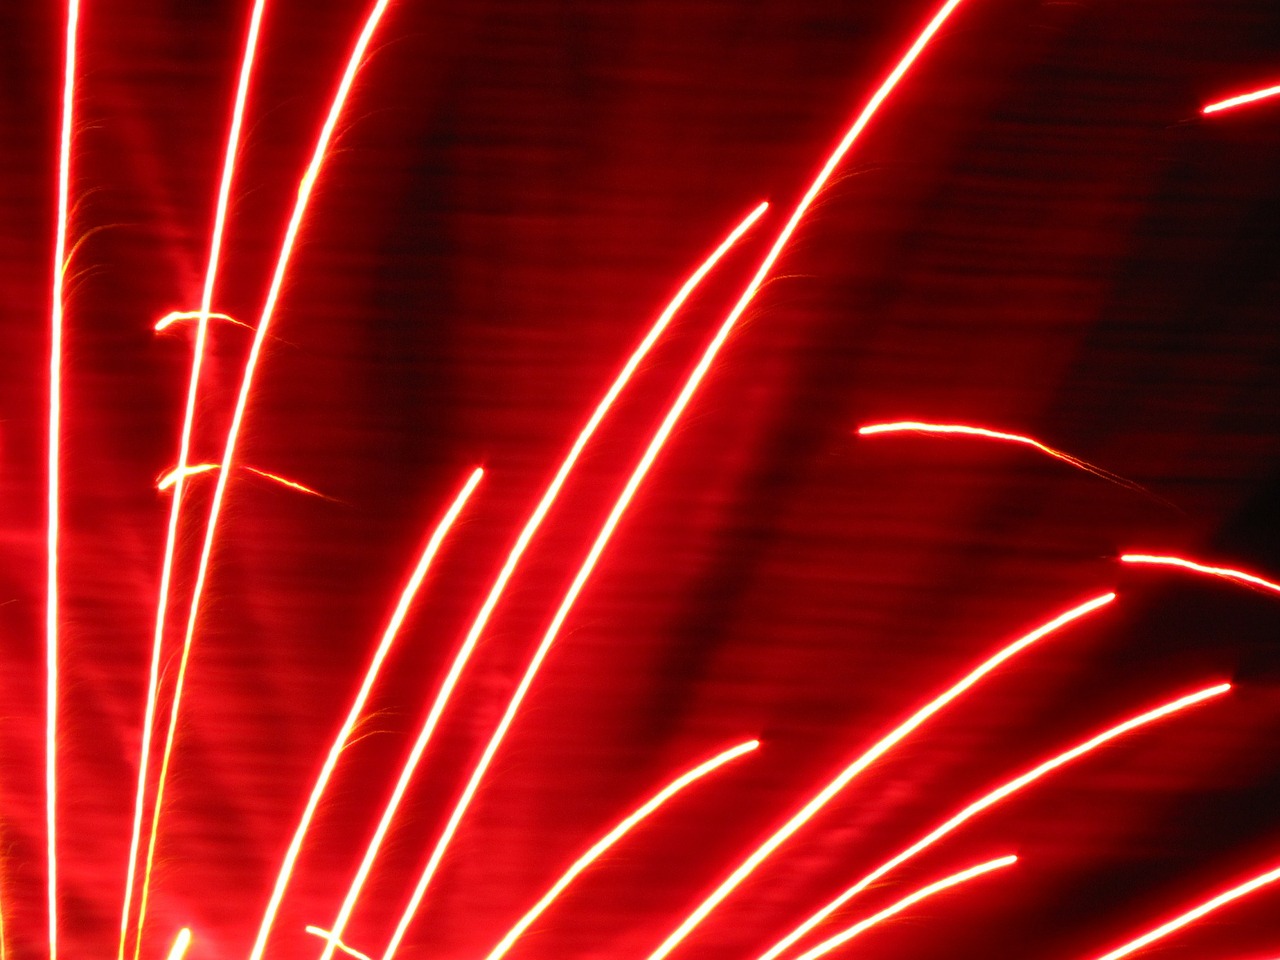 fires artifice fireworks free photo